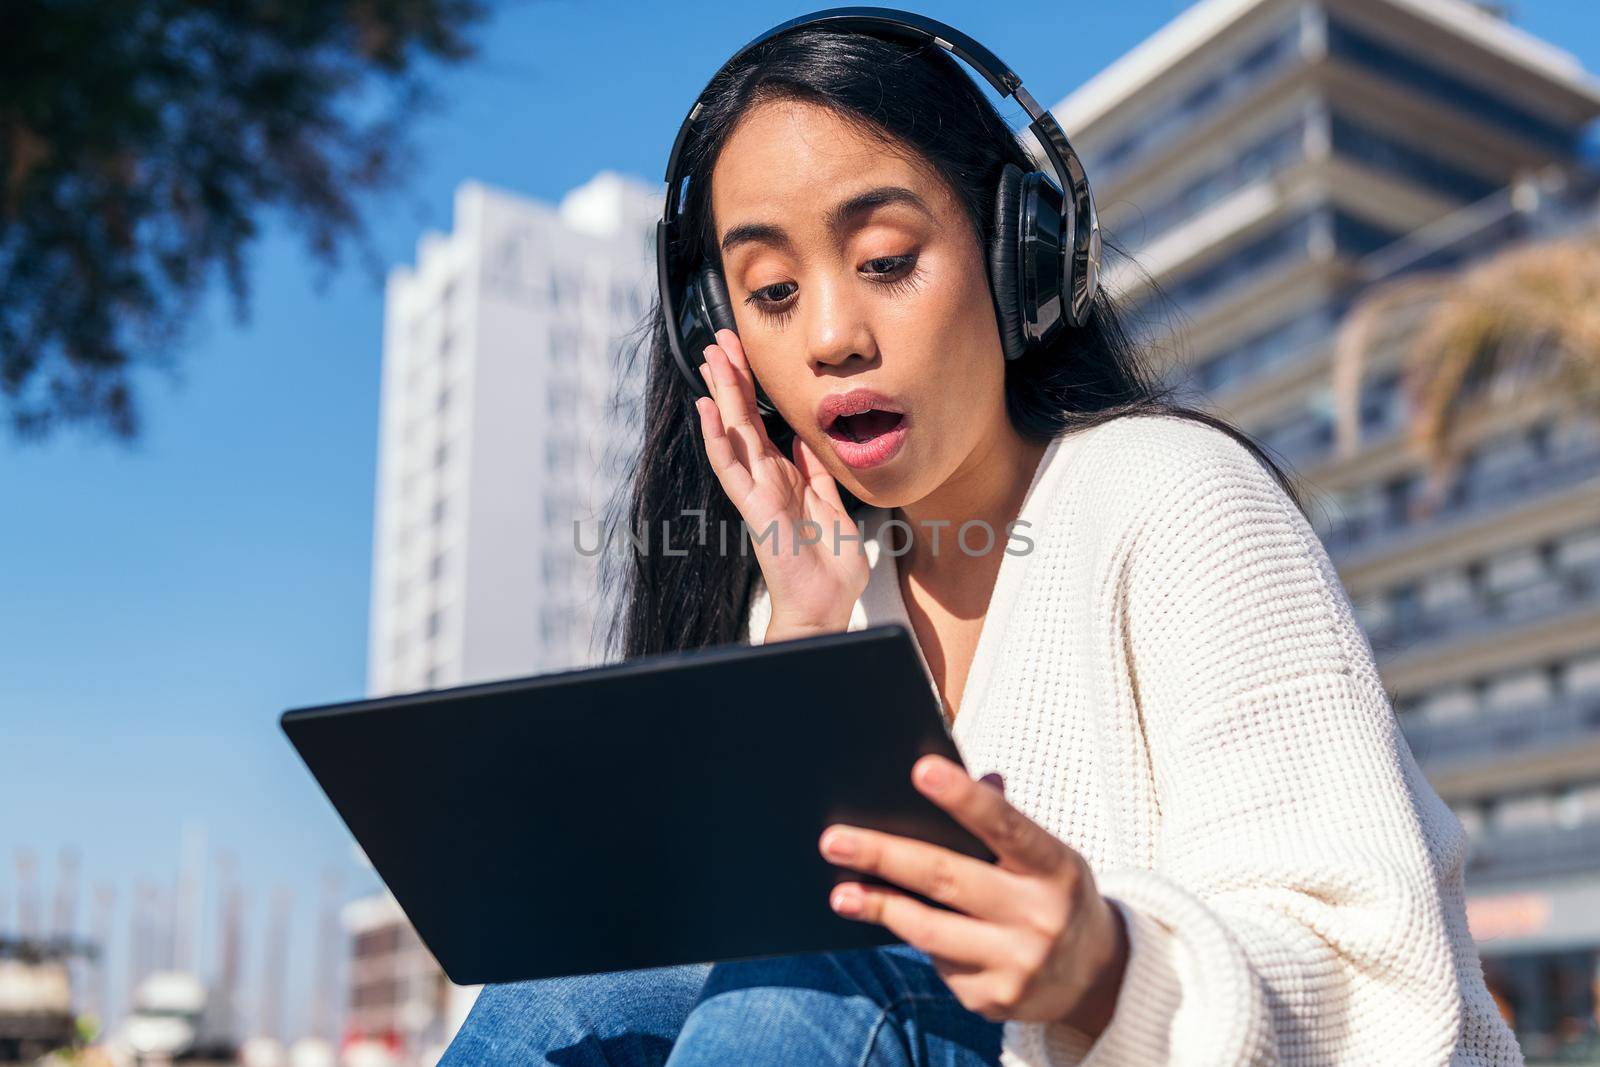 surprised woman with headphones watching videos by raulmelldo